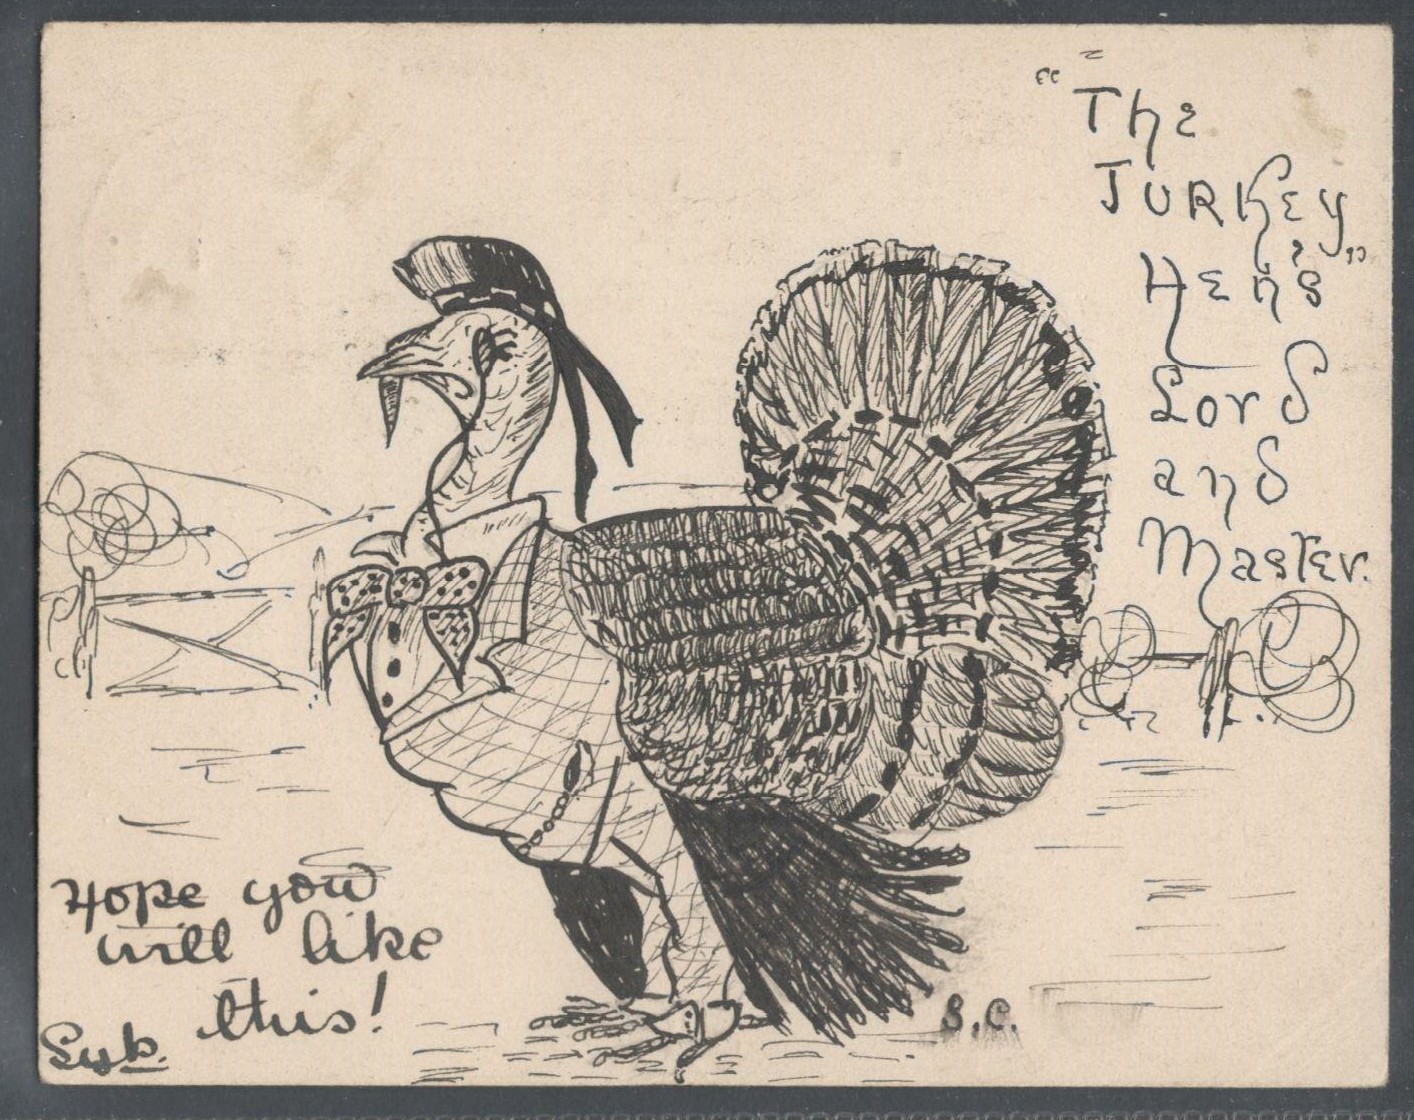 ANTIQUE SMALL POSTED POSTCARDS WITH HAND DRAWN SKETCH OF TURKEY